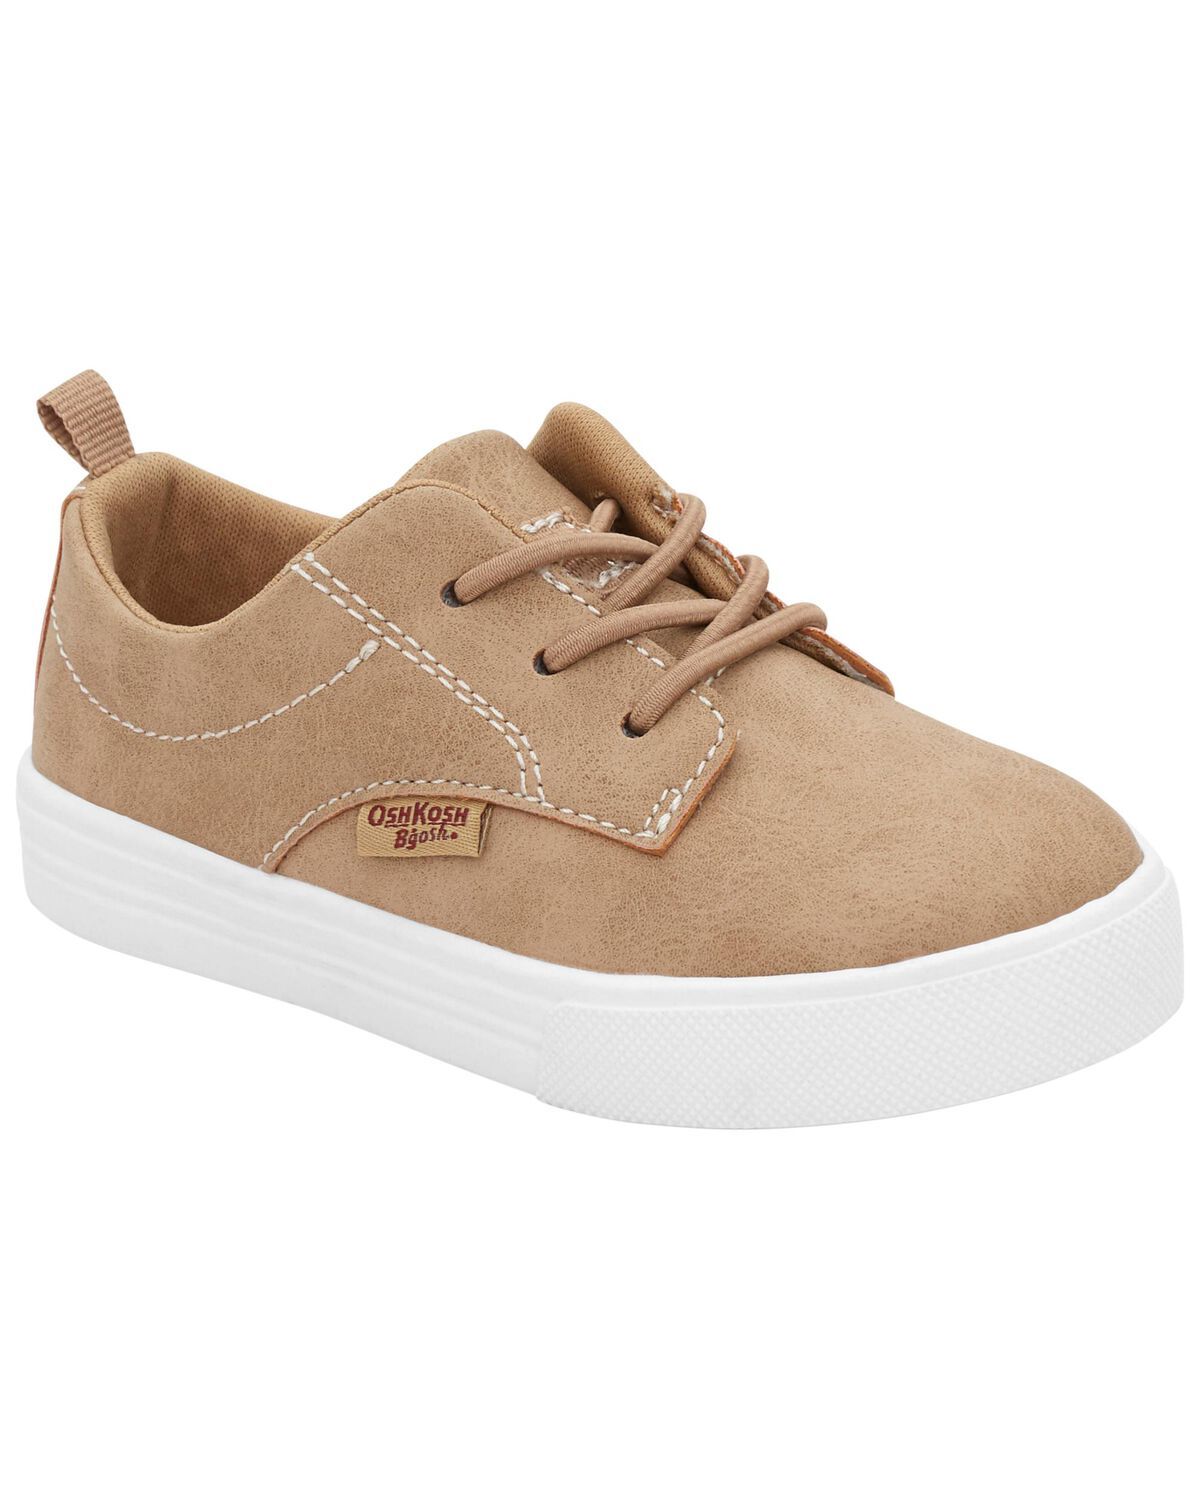 Toddler Casual Canvas Shoes | Carter's